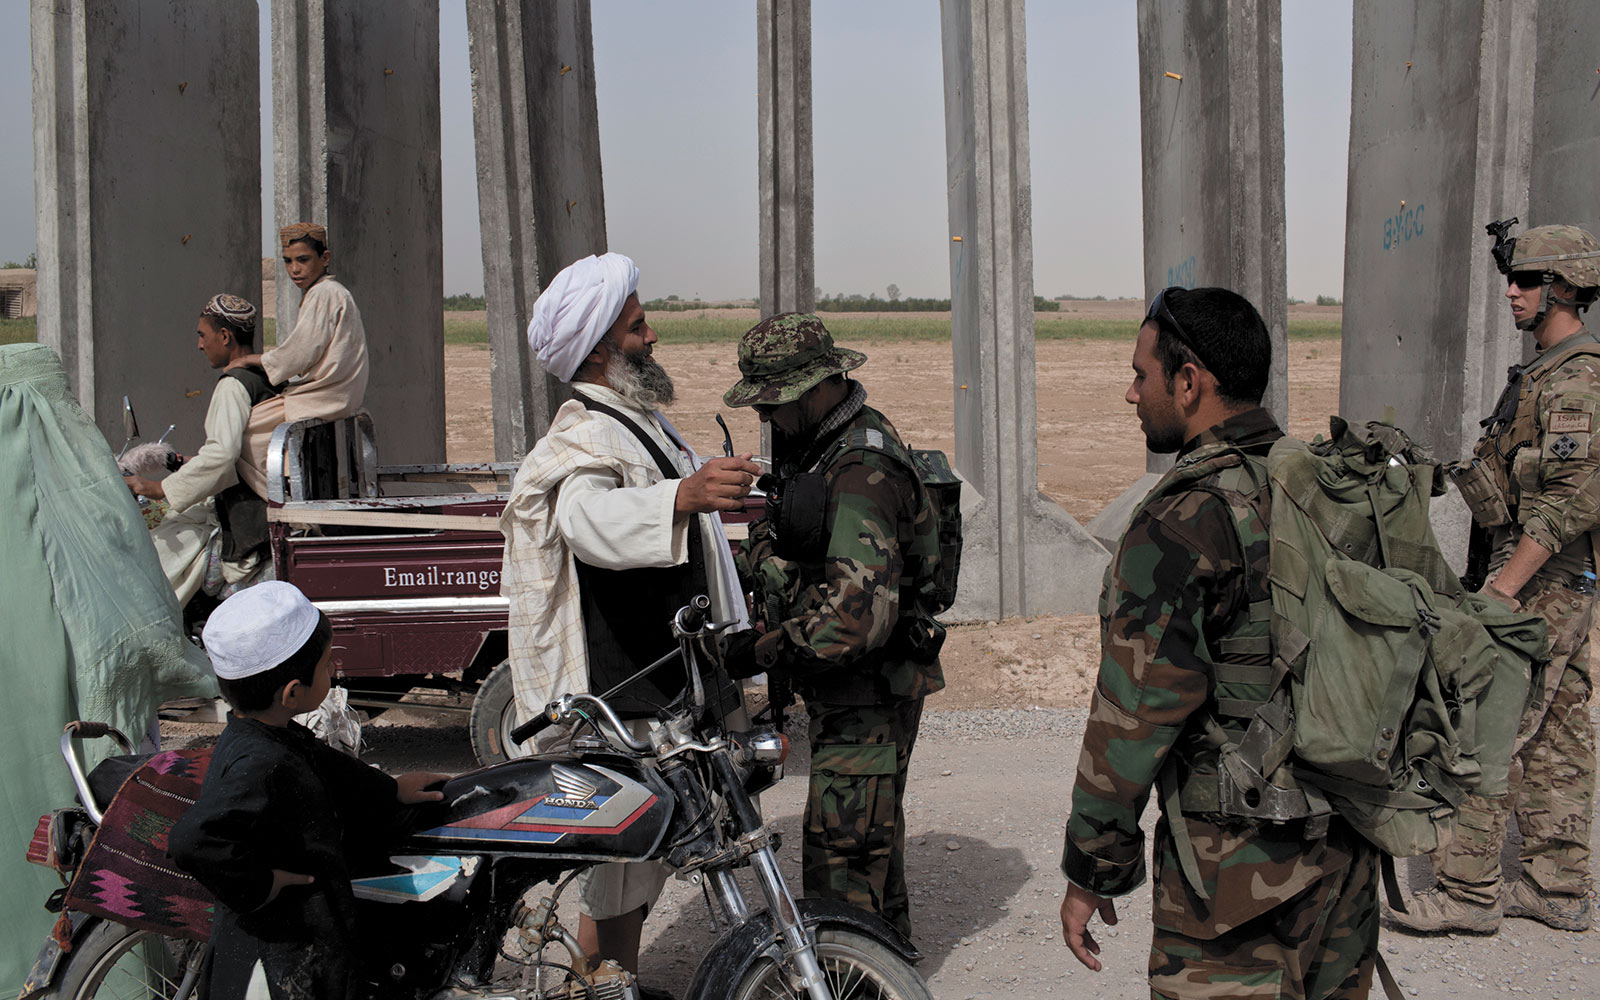 Afghan soldiers search a motorcyclist for weapons, explosives, or insurgent paraphernalia at a traffic control point.